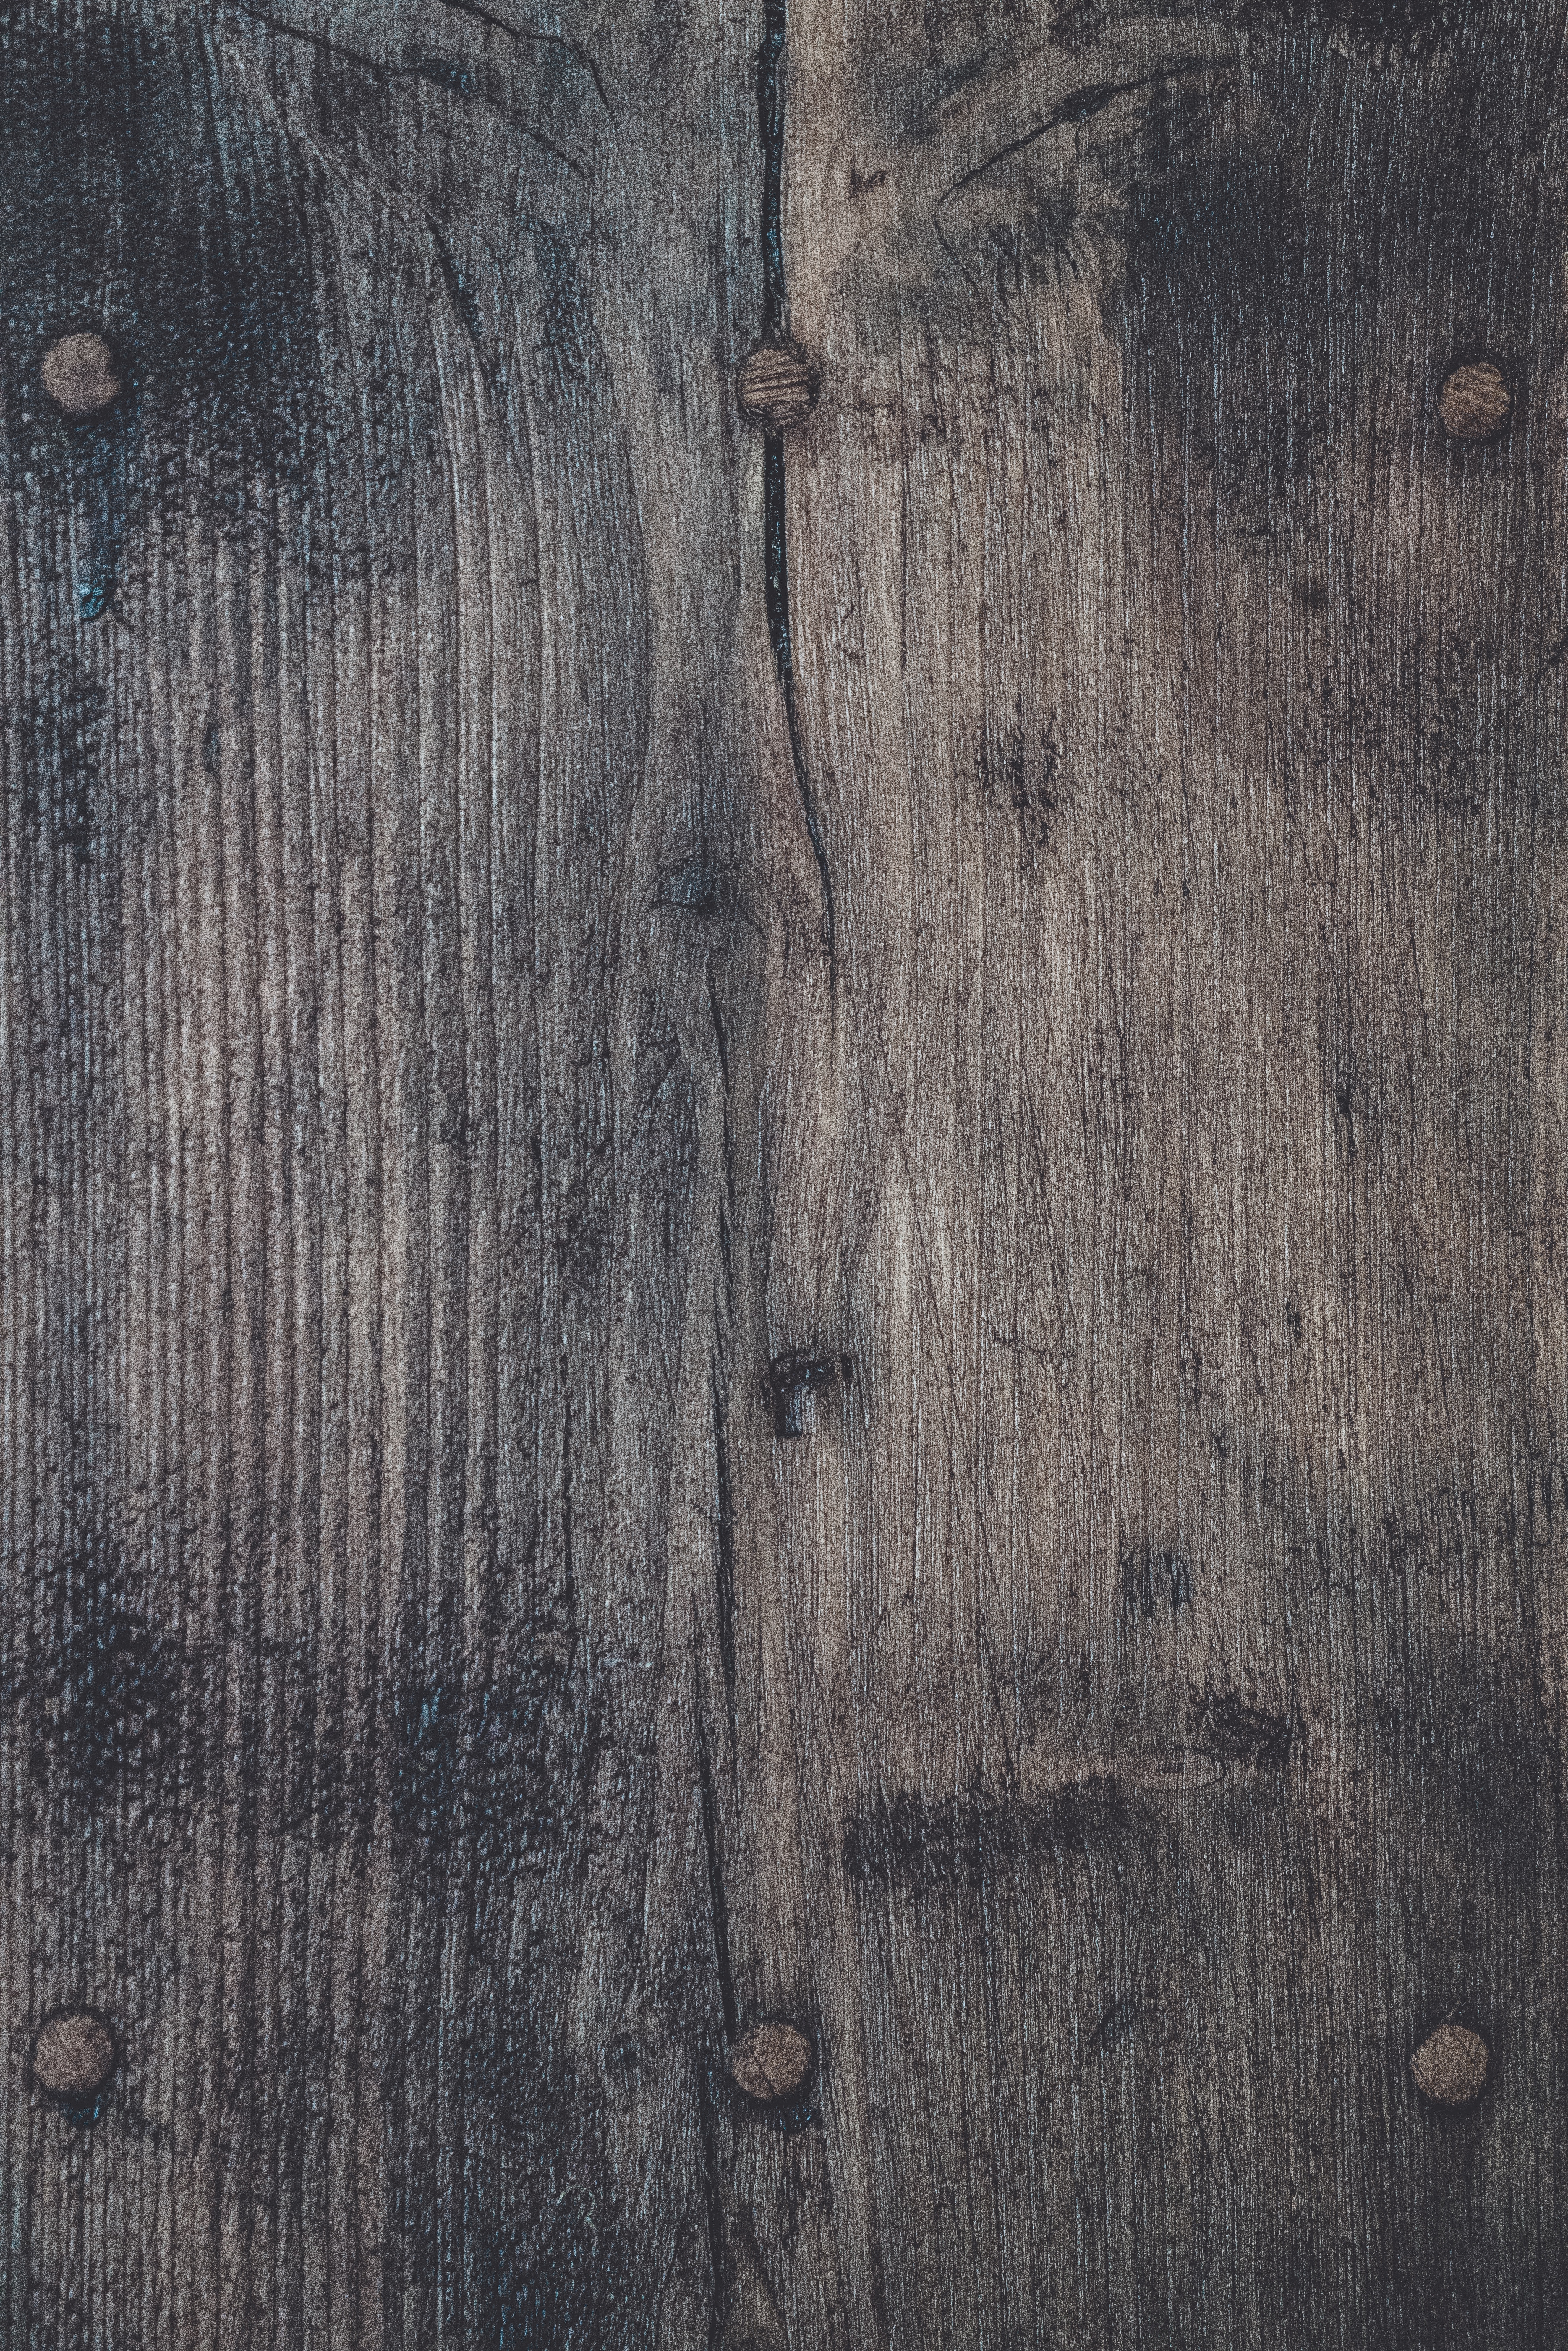 texture, wooden, textures, surface, ribbed, wood